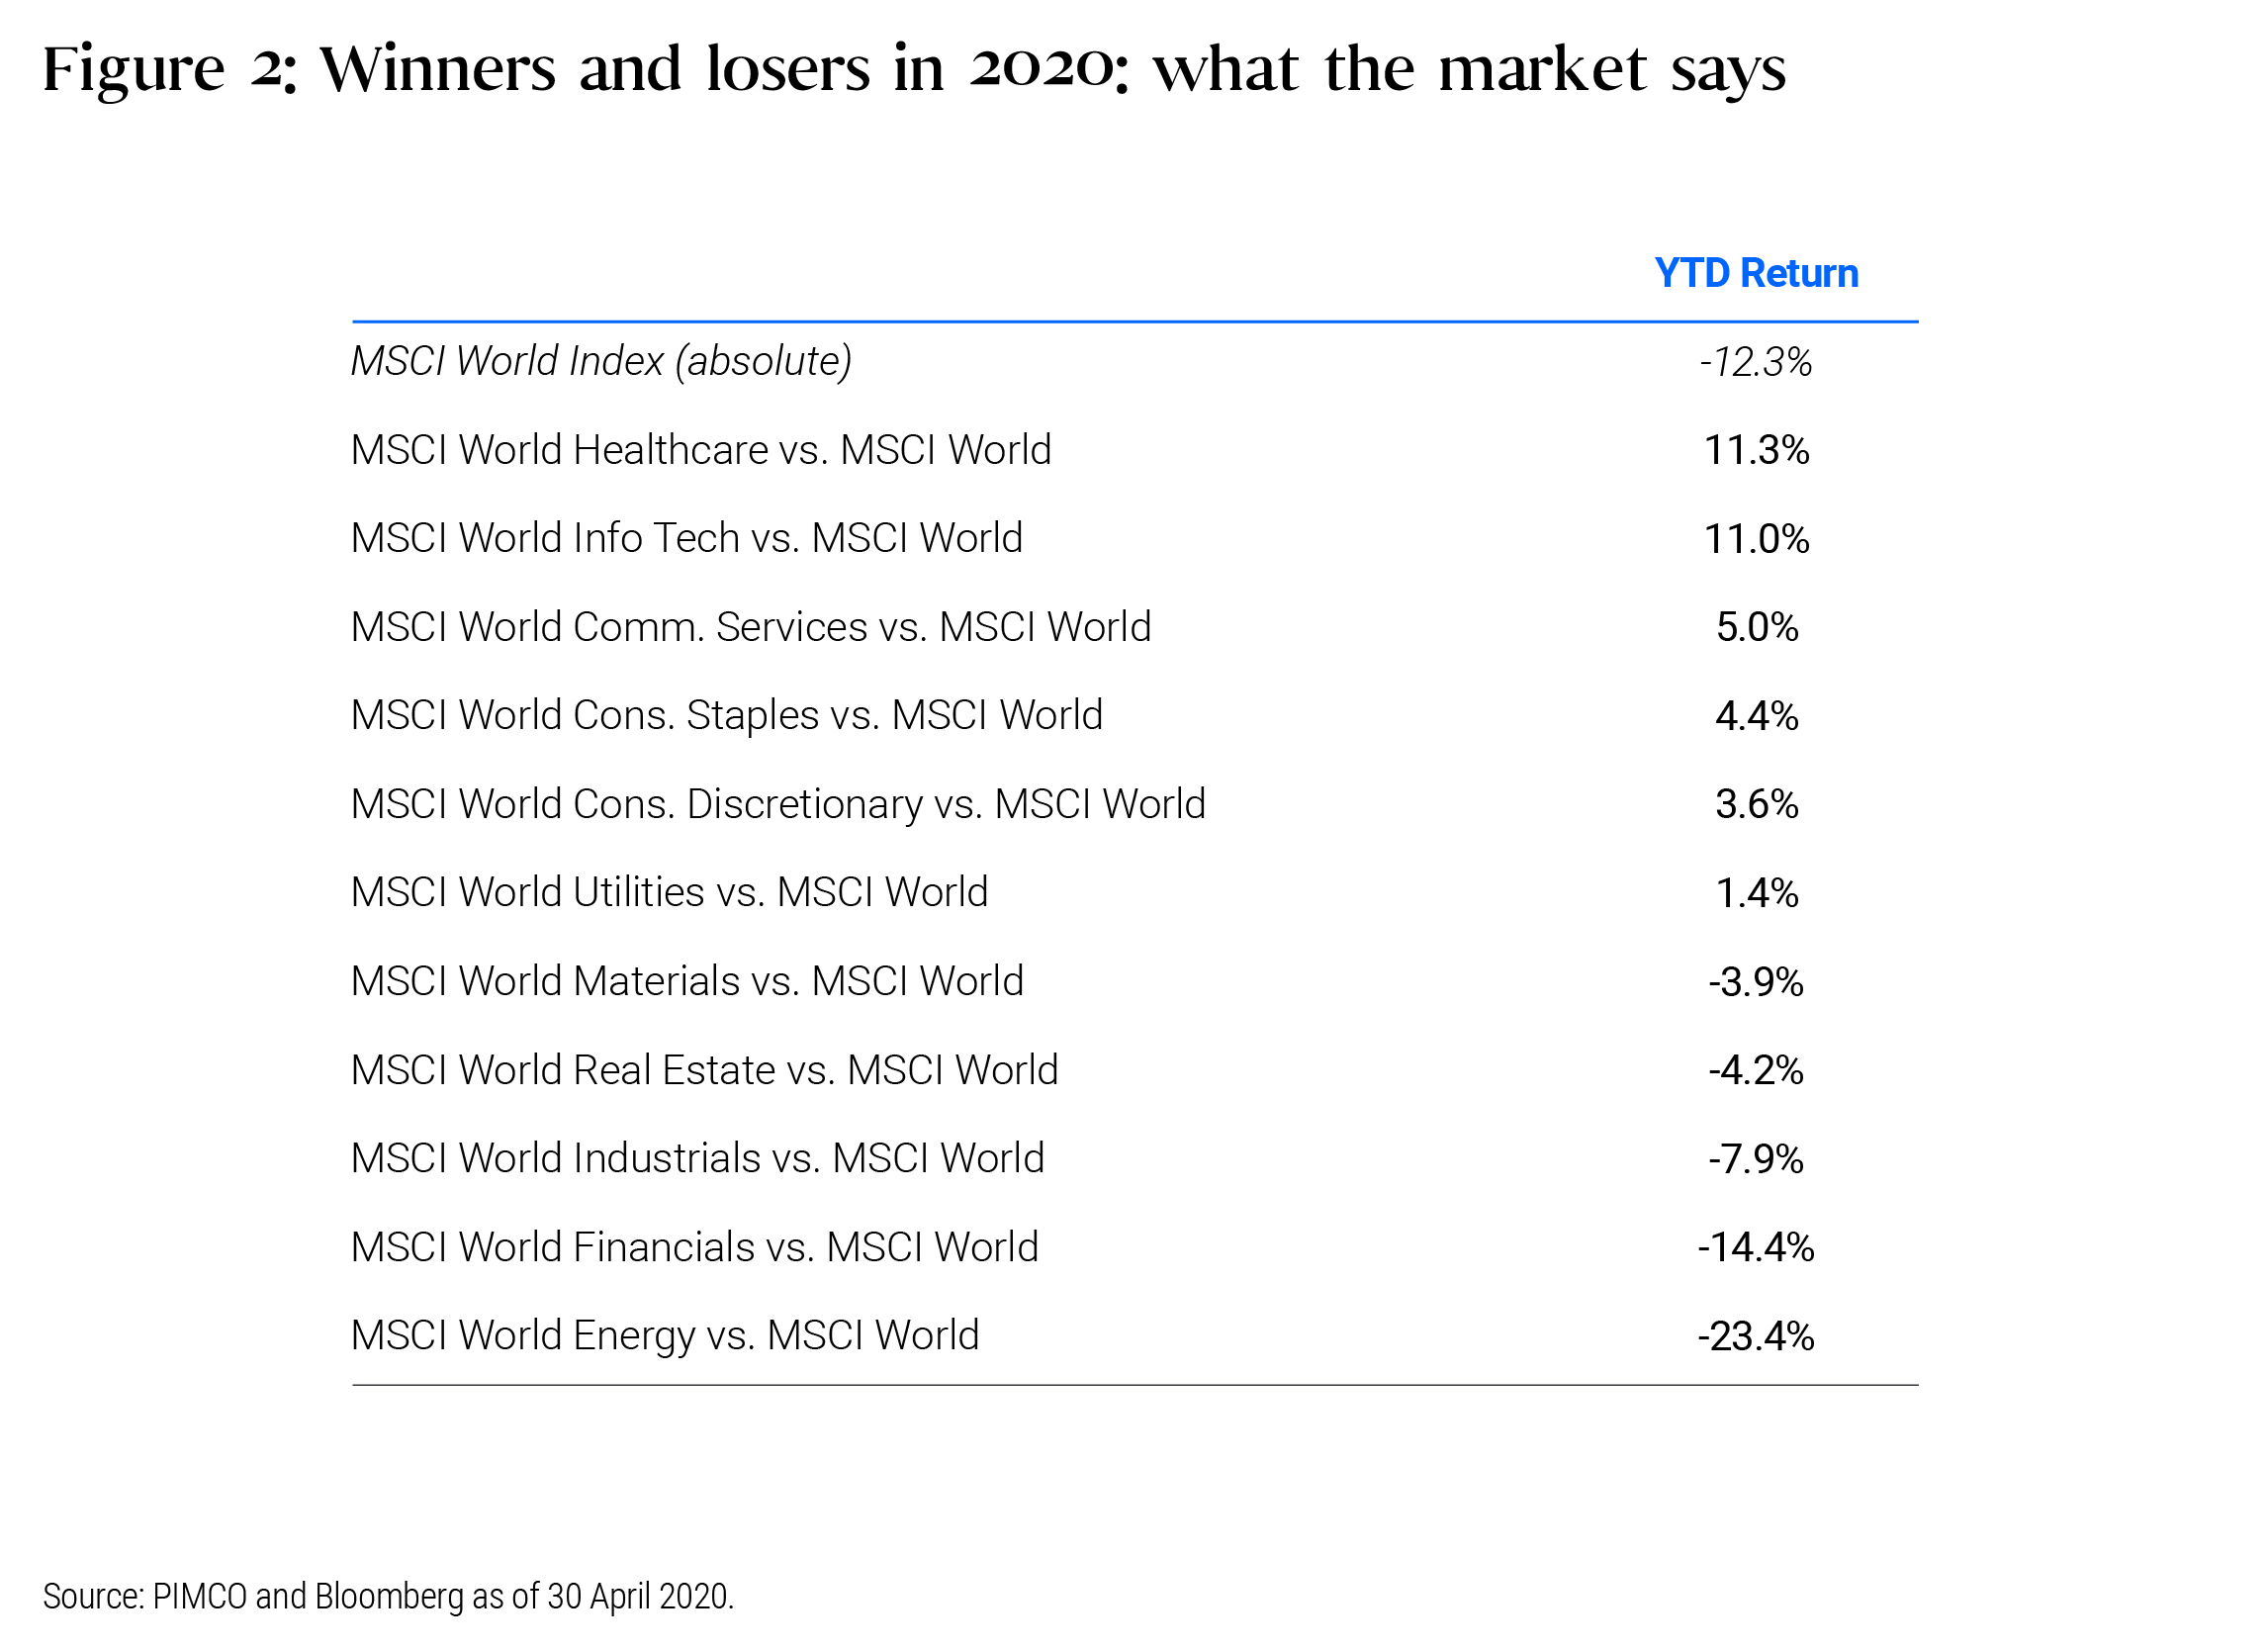 Figure 2: The performance of each industry sector in the MSCI World Index compared to the performance of the entire index between December 31st 2019 and April 30th 2020. 